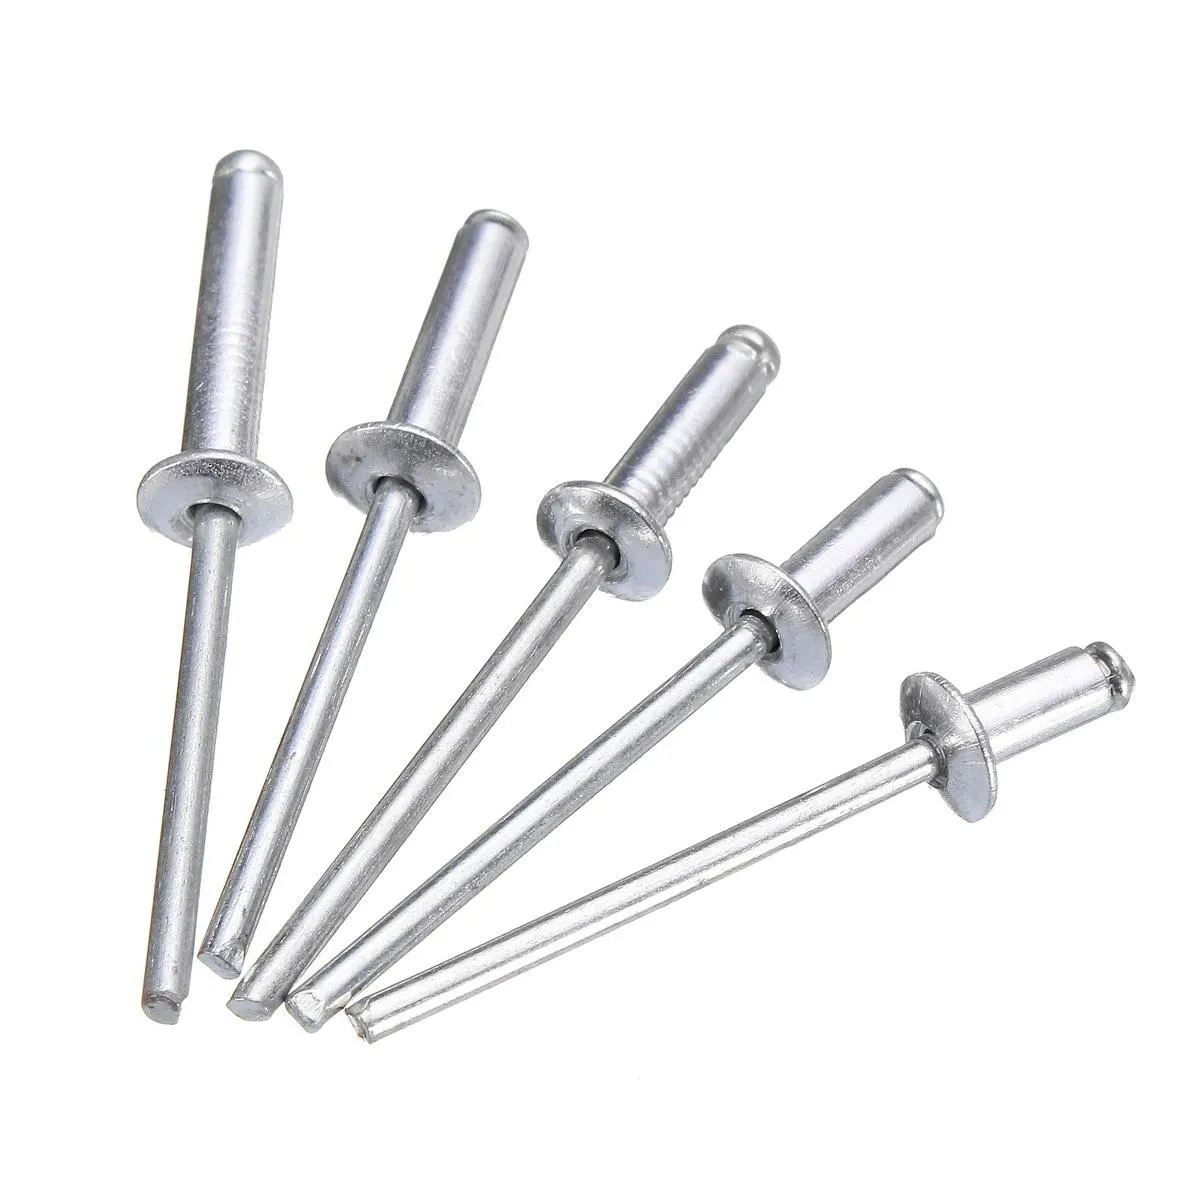 China Manufacturer Suppliers Cheap Prices 3.2X6Mm Pop Open Lantern Type Extra Length Aluminum Steel Blind Rivet For Connection